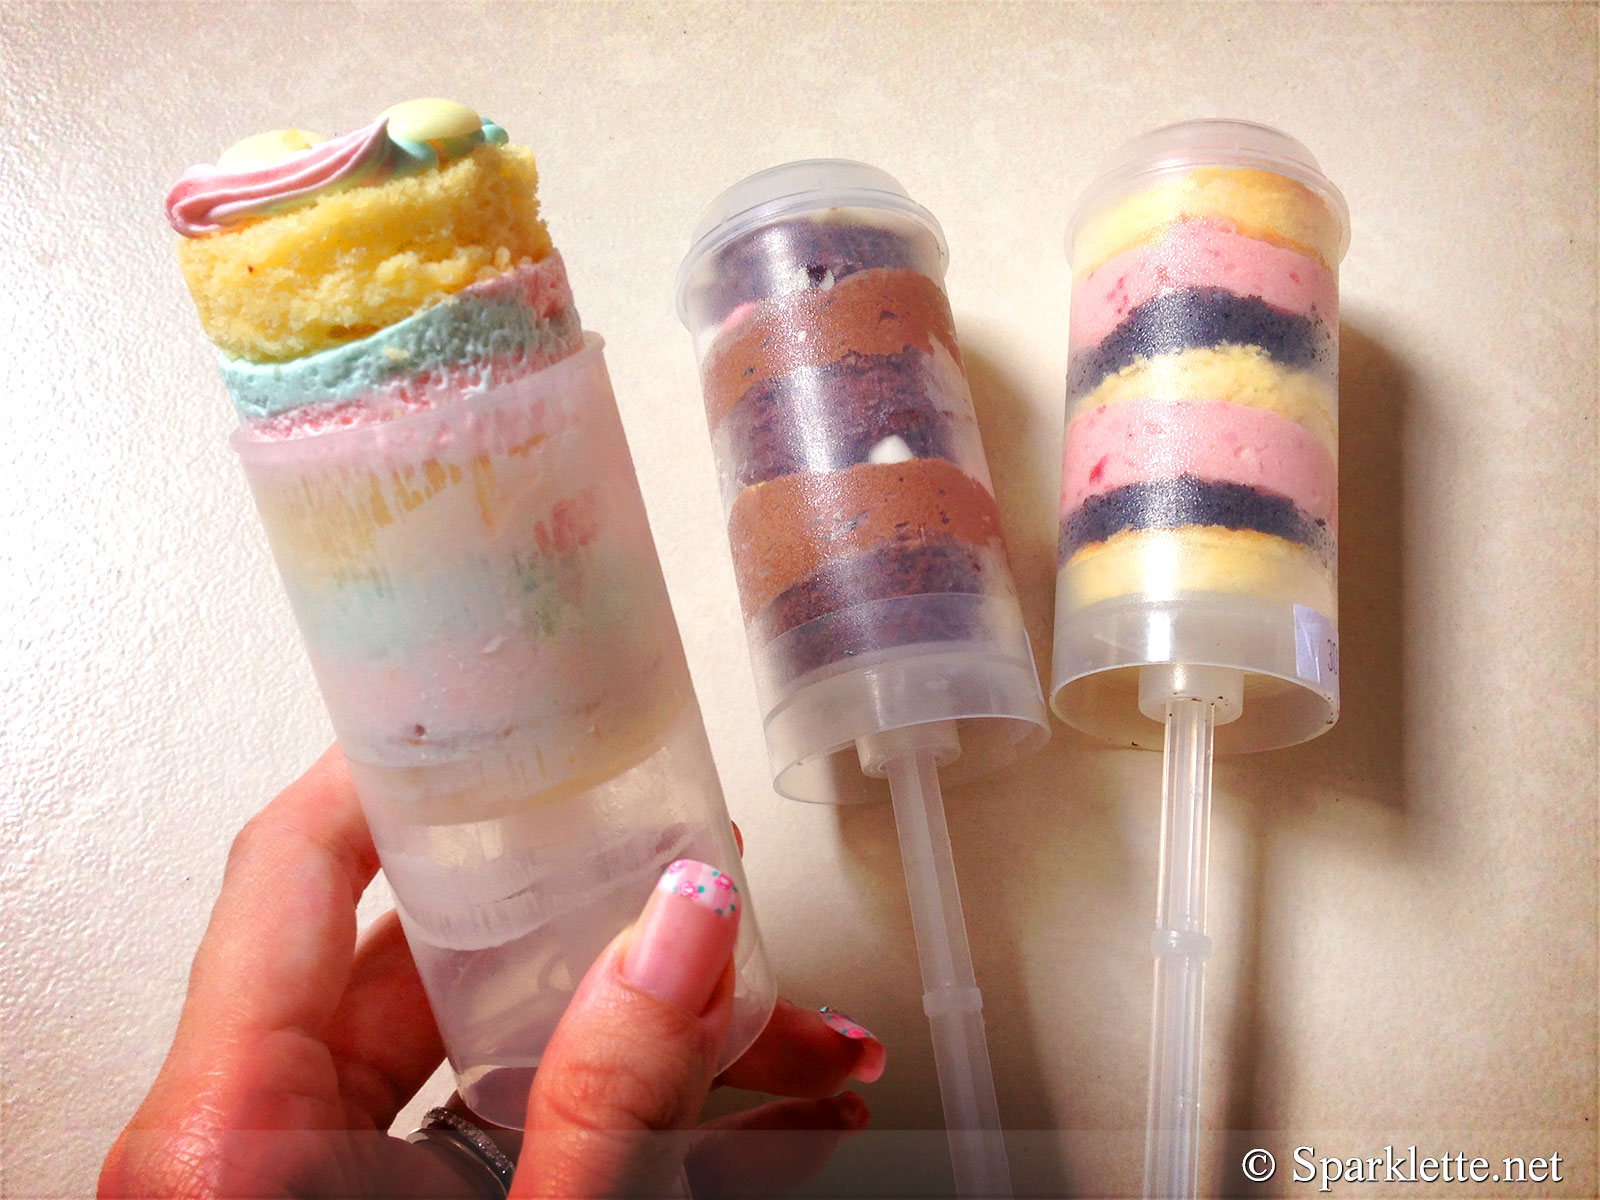 Push 'N' Pop cakes from Emicakes